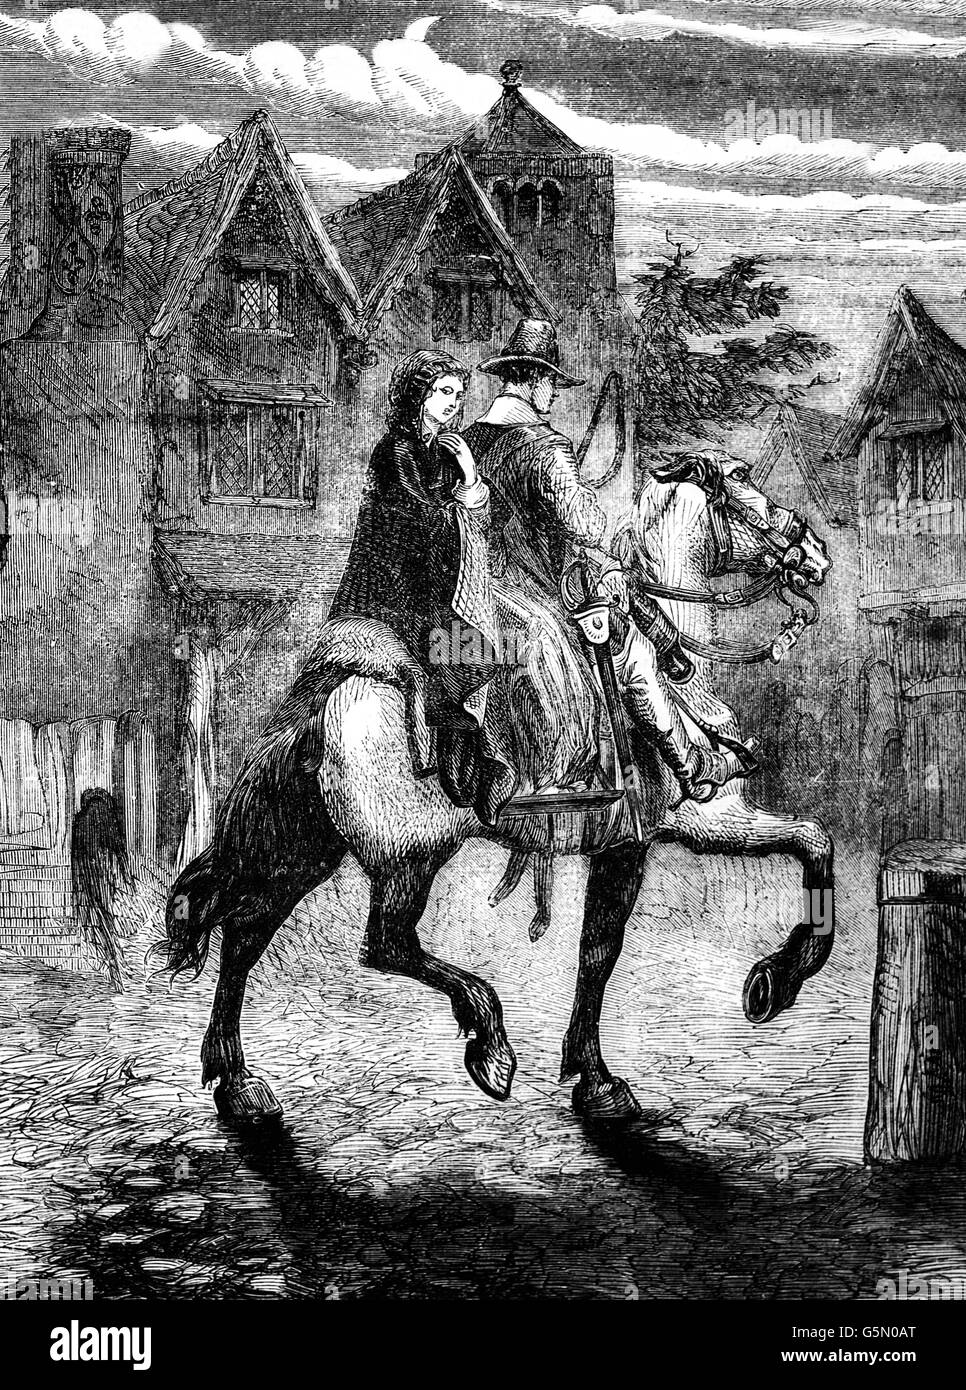 After the army Charles II had raised in Scotland suffered its second defeat at Worcester in 1651 he escaped and headed north to Bentley Hall in Staffordshire. It was decided that the King would act as the servant of Jane Lane, the daughter of  Colonel John Lane and travel to Bristol to find a ship for France. Stock Photo